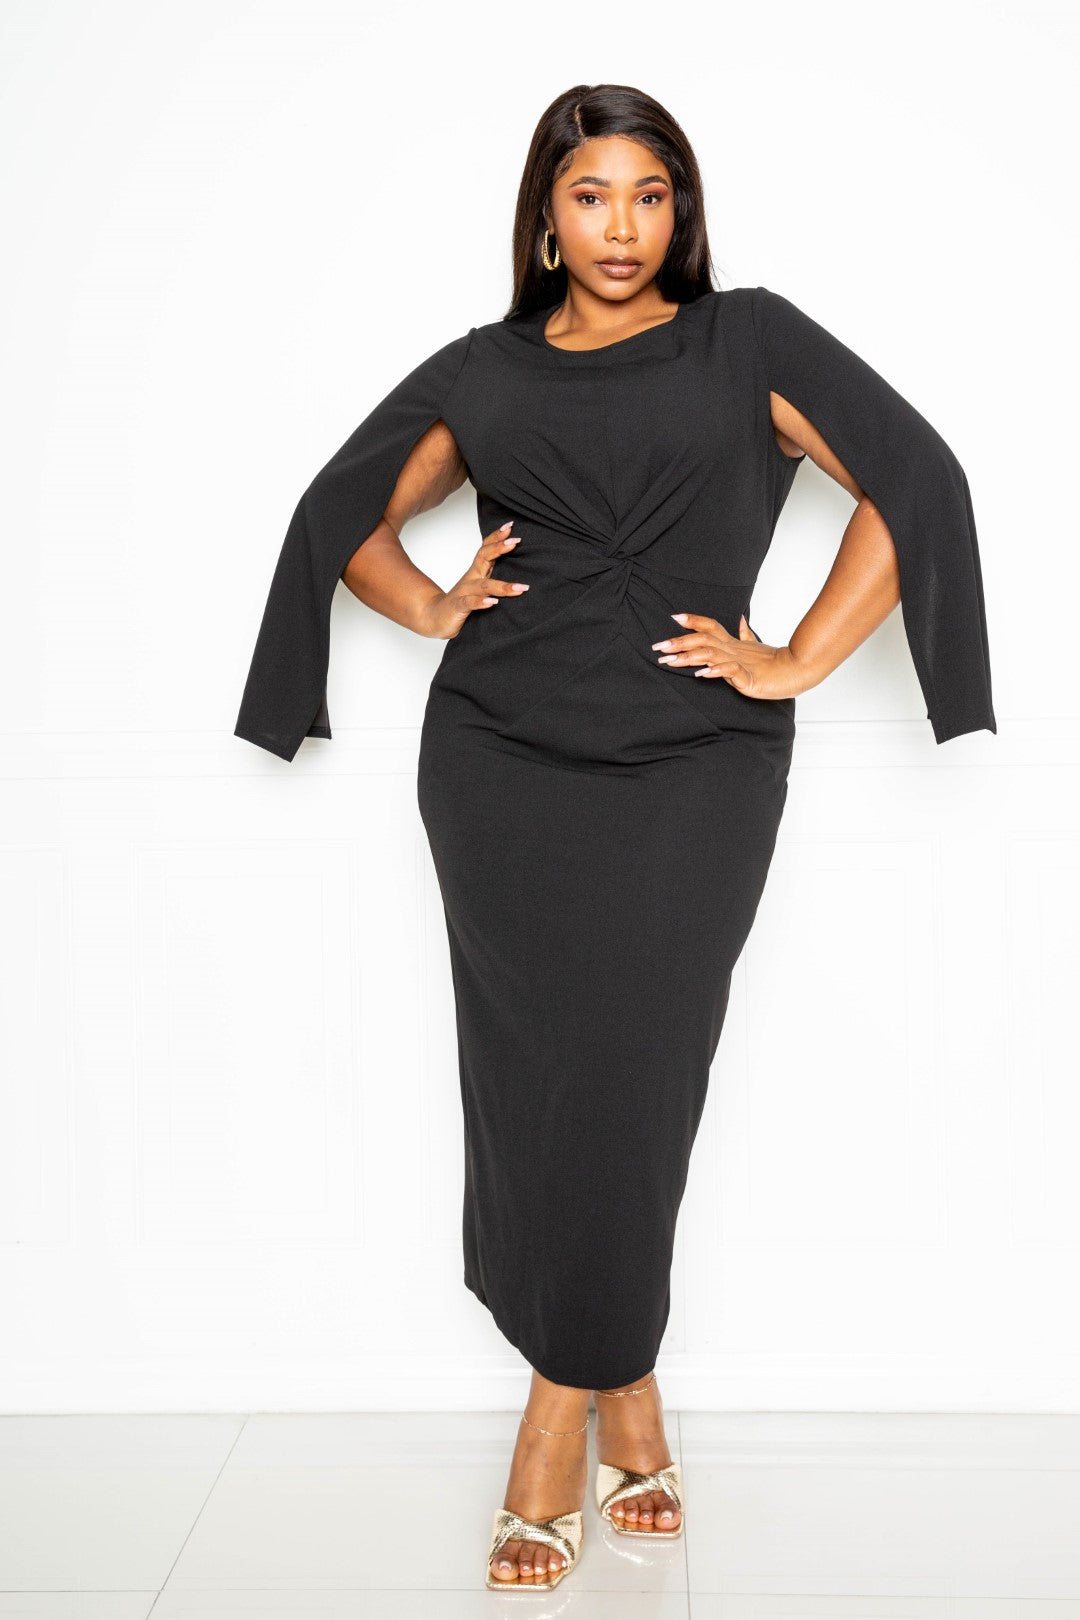 Cape Sleeve Dress With Knot Detail | Black, Orange Red, PLUS SIZE, PLUS SIZE DRESSES, SALE, SALE PLUS SIZE | Style Your Curves